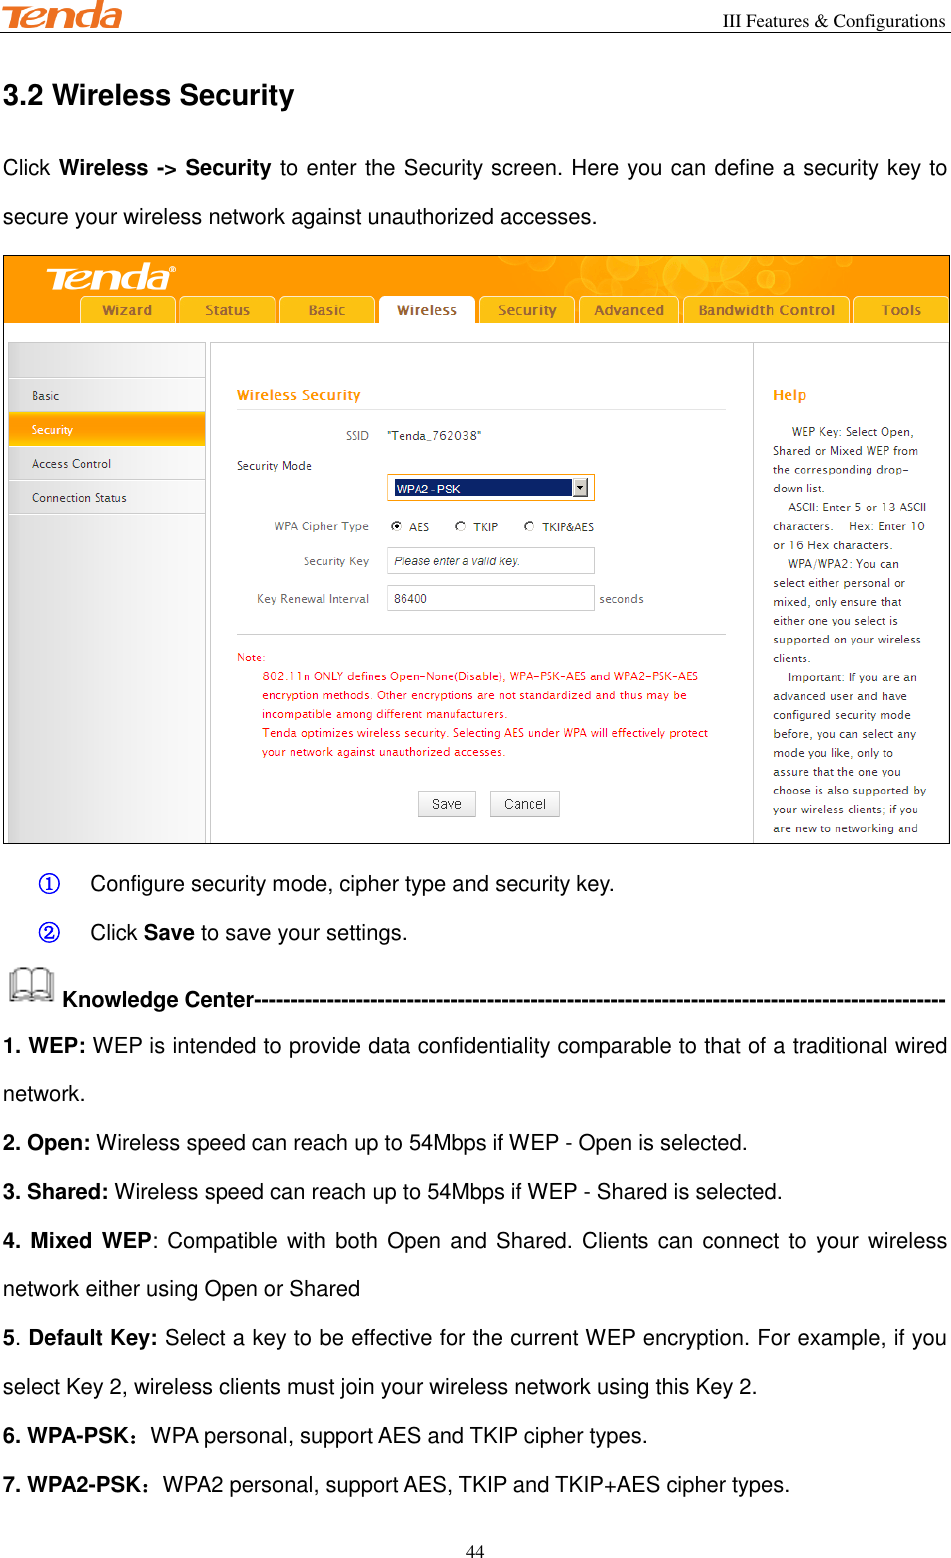                                                        III Features &amp; Configurations           44 3.2 Wireless Security Click Wireless -&gt; Security to enter the Security screen. Here you can define a security key to secure your wireless network against unauthorized accesses.  ① Configure security mode, cipher type and security key. ② Click Save to save your settings. Knowledge Center----------------------------------------------------------------------------------------------- 1. WEP: WEP is intended to provide data confidentiality comparable to that of a traditional wired network. 2. Open: Wireless speed can reach up to 54Mbps if WEP - Open is selected. 3. Shared: Wireless speed can reach up to 54Mbps if WEP - Shared is selected. 4. Mixed WEP: Compatible with both Open and Shared. Clients can  connect to  your wireless network either using Open or Shared 5. Default Key: Select a key to be effective for the current WEP encryption. For example, if you select Key 2, wireless clients must join your wireless network using this Key 2. 6. WPA-PSK：WPA personal, support AES and TKIP cipher types. 7. WPA2-PSK：WPA2 personal, support AES, TKIP and TKIP+AES cipher types. 